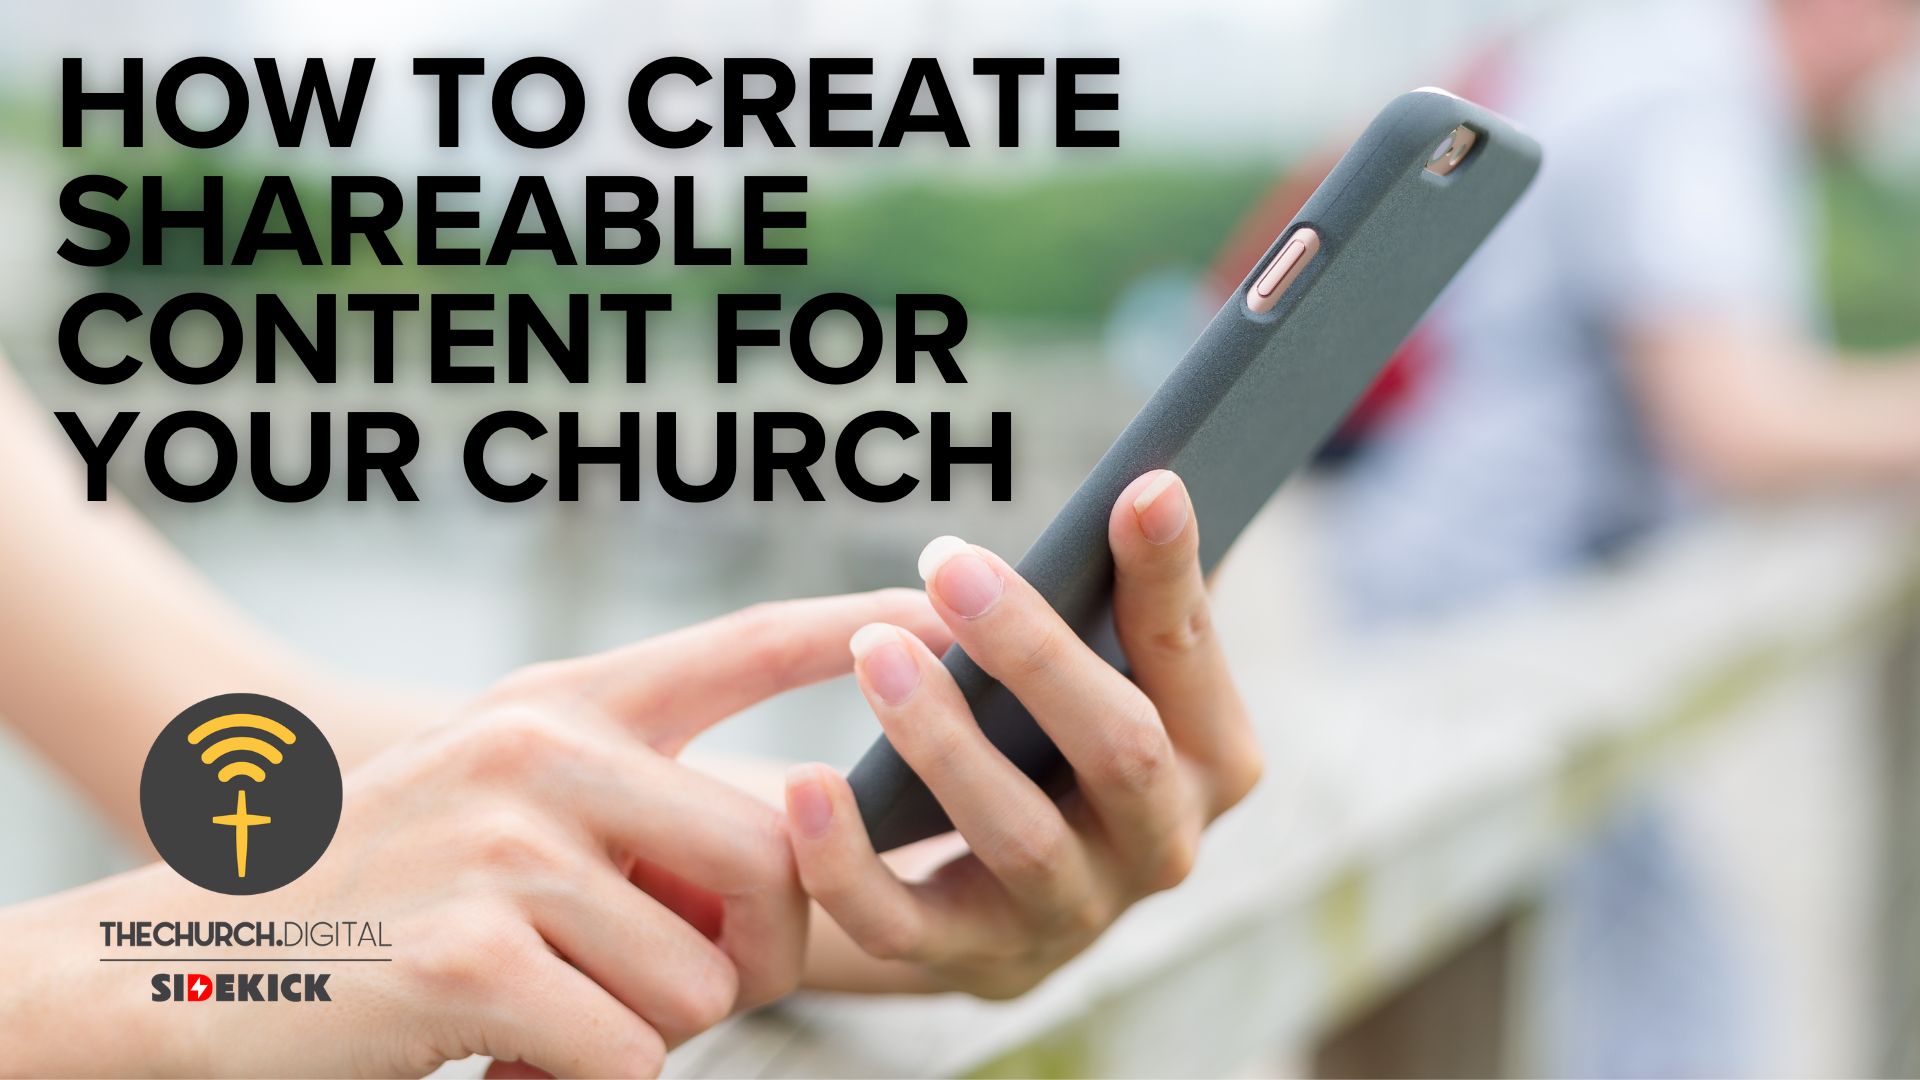 How to Create Shareable Content for Your Church